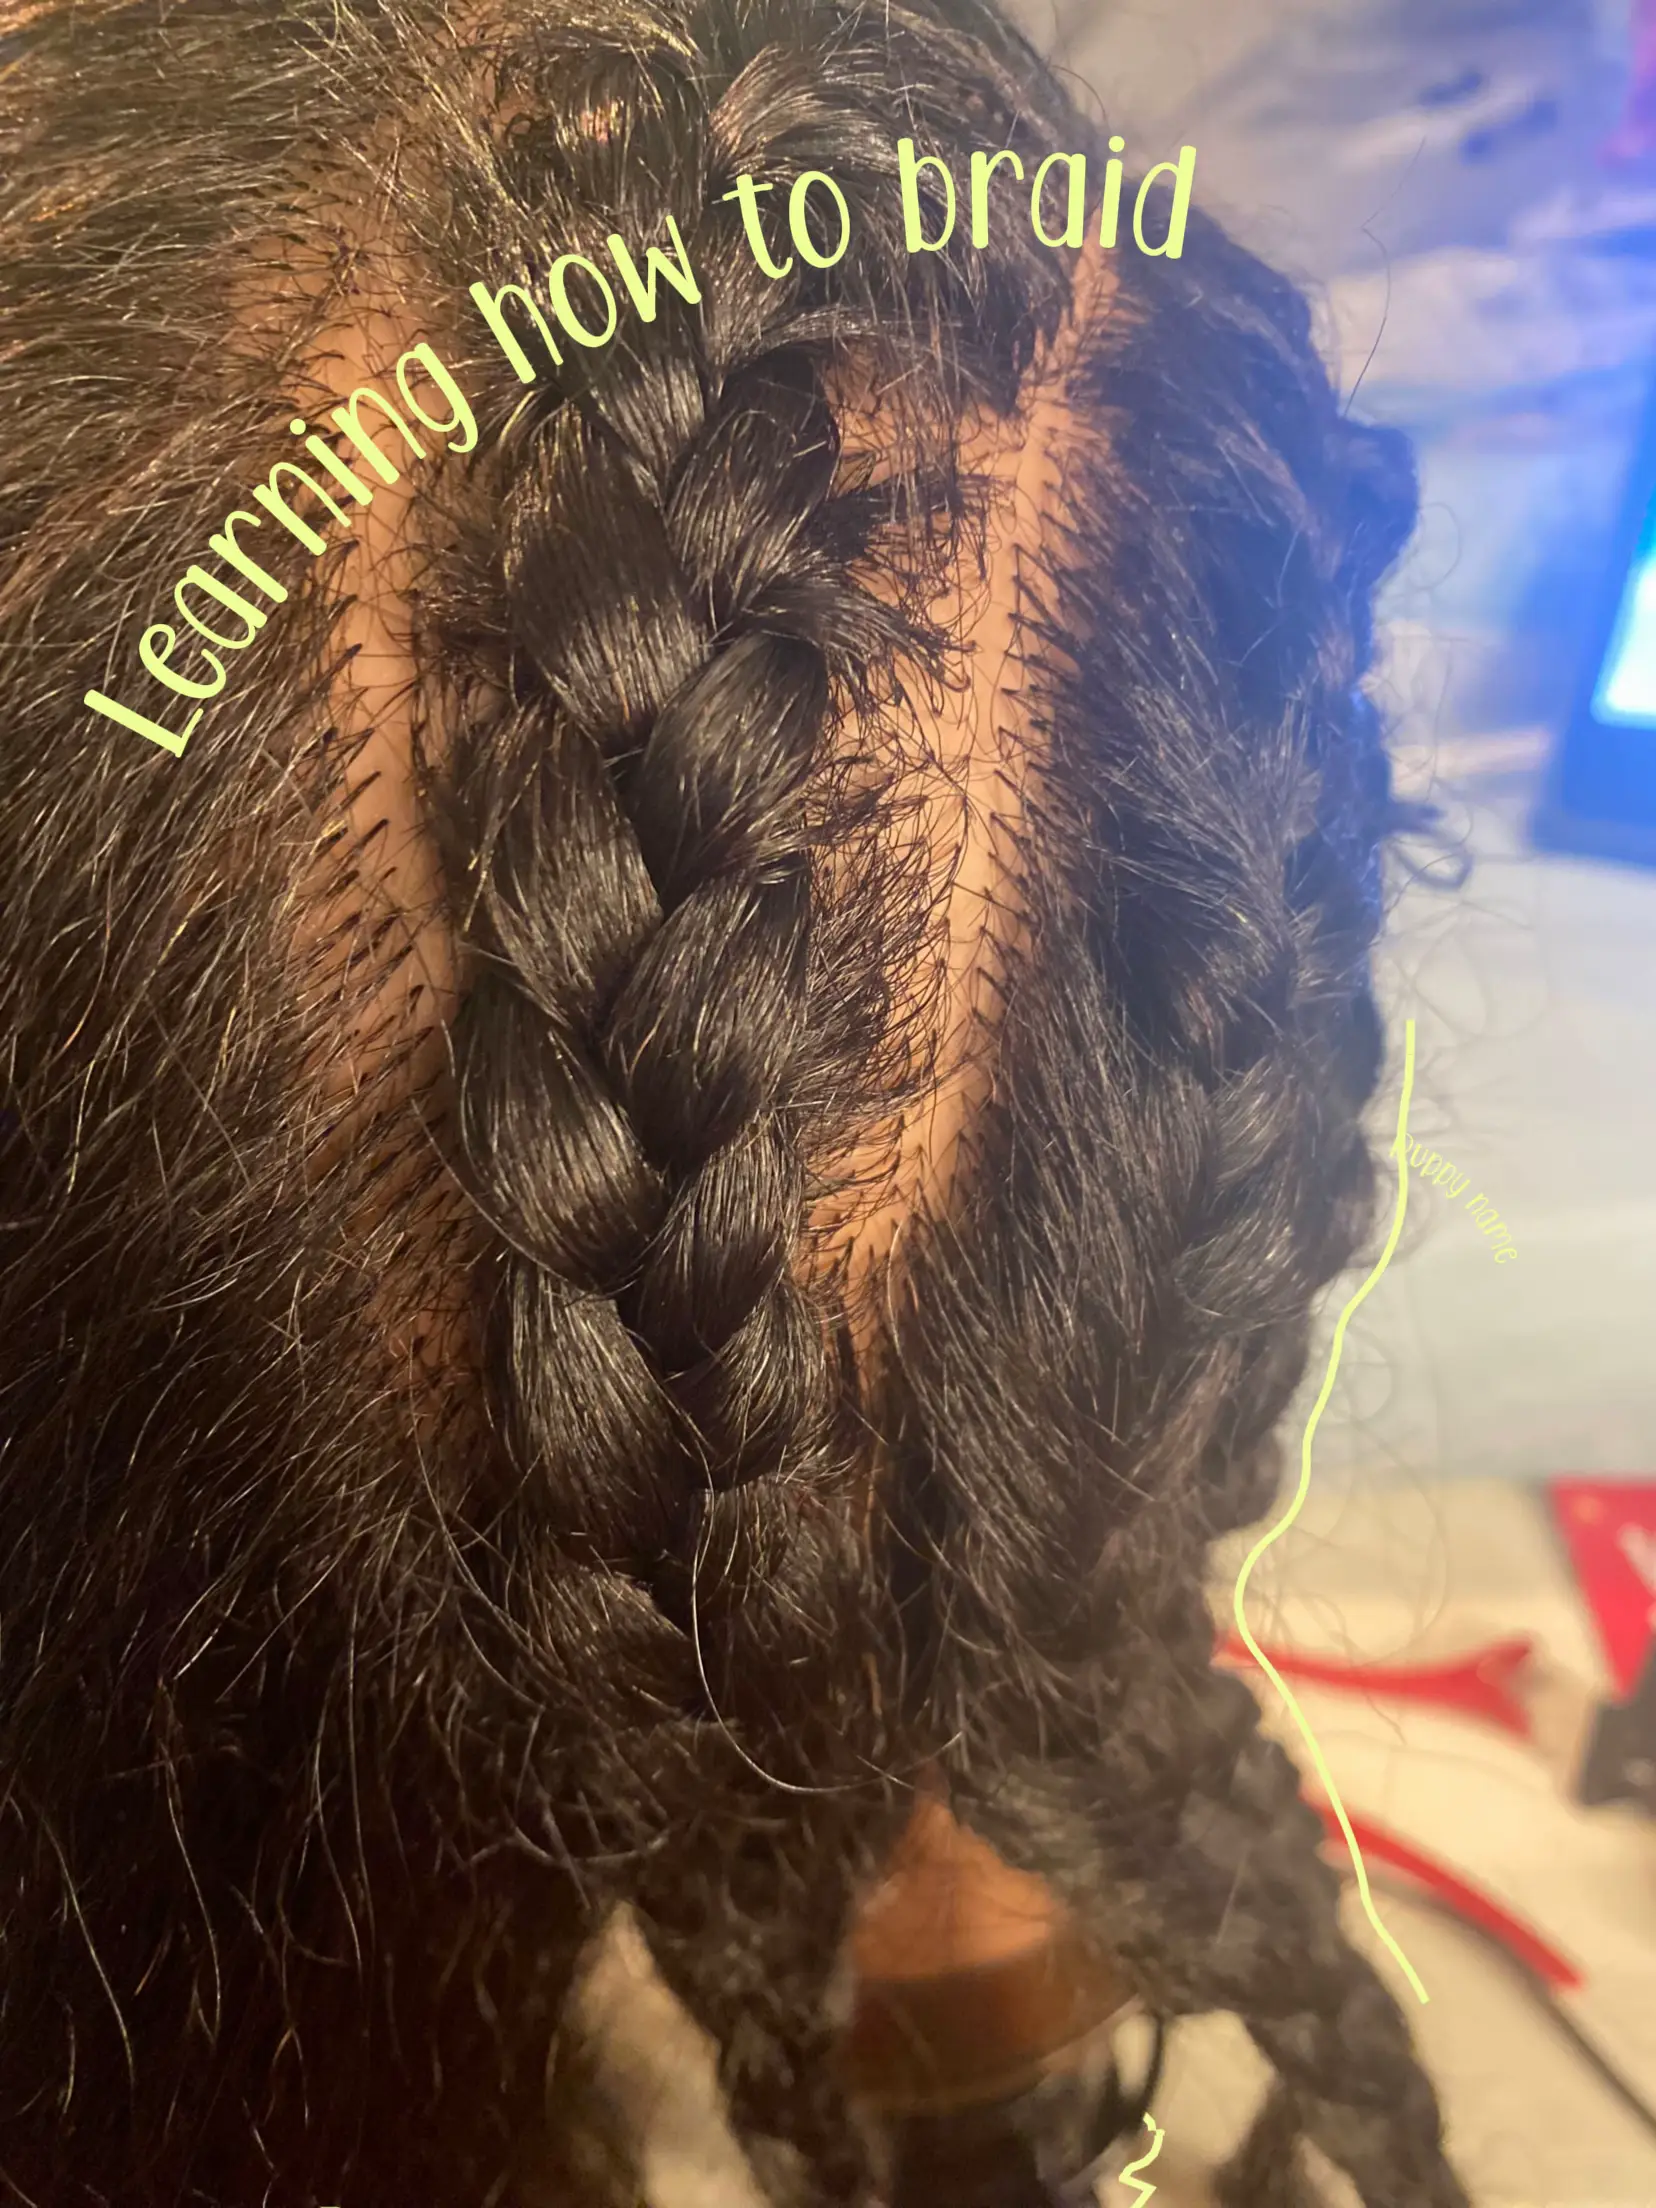 Learning how to braid, Gallery posted by Yto Vlogzzz